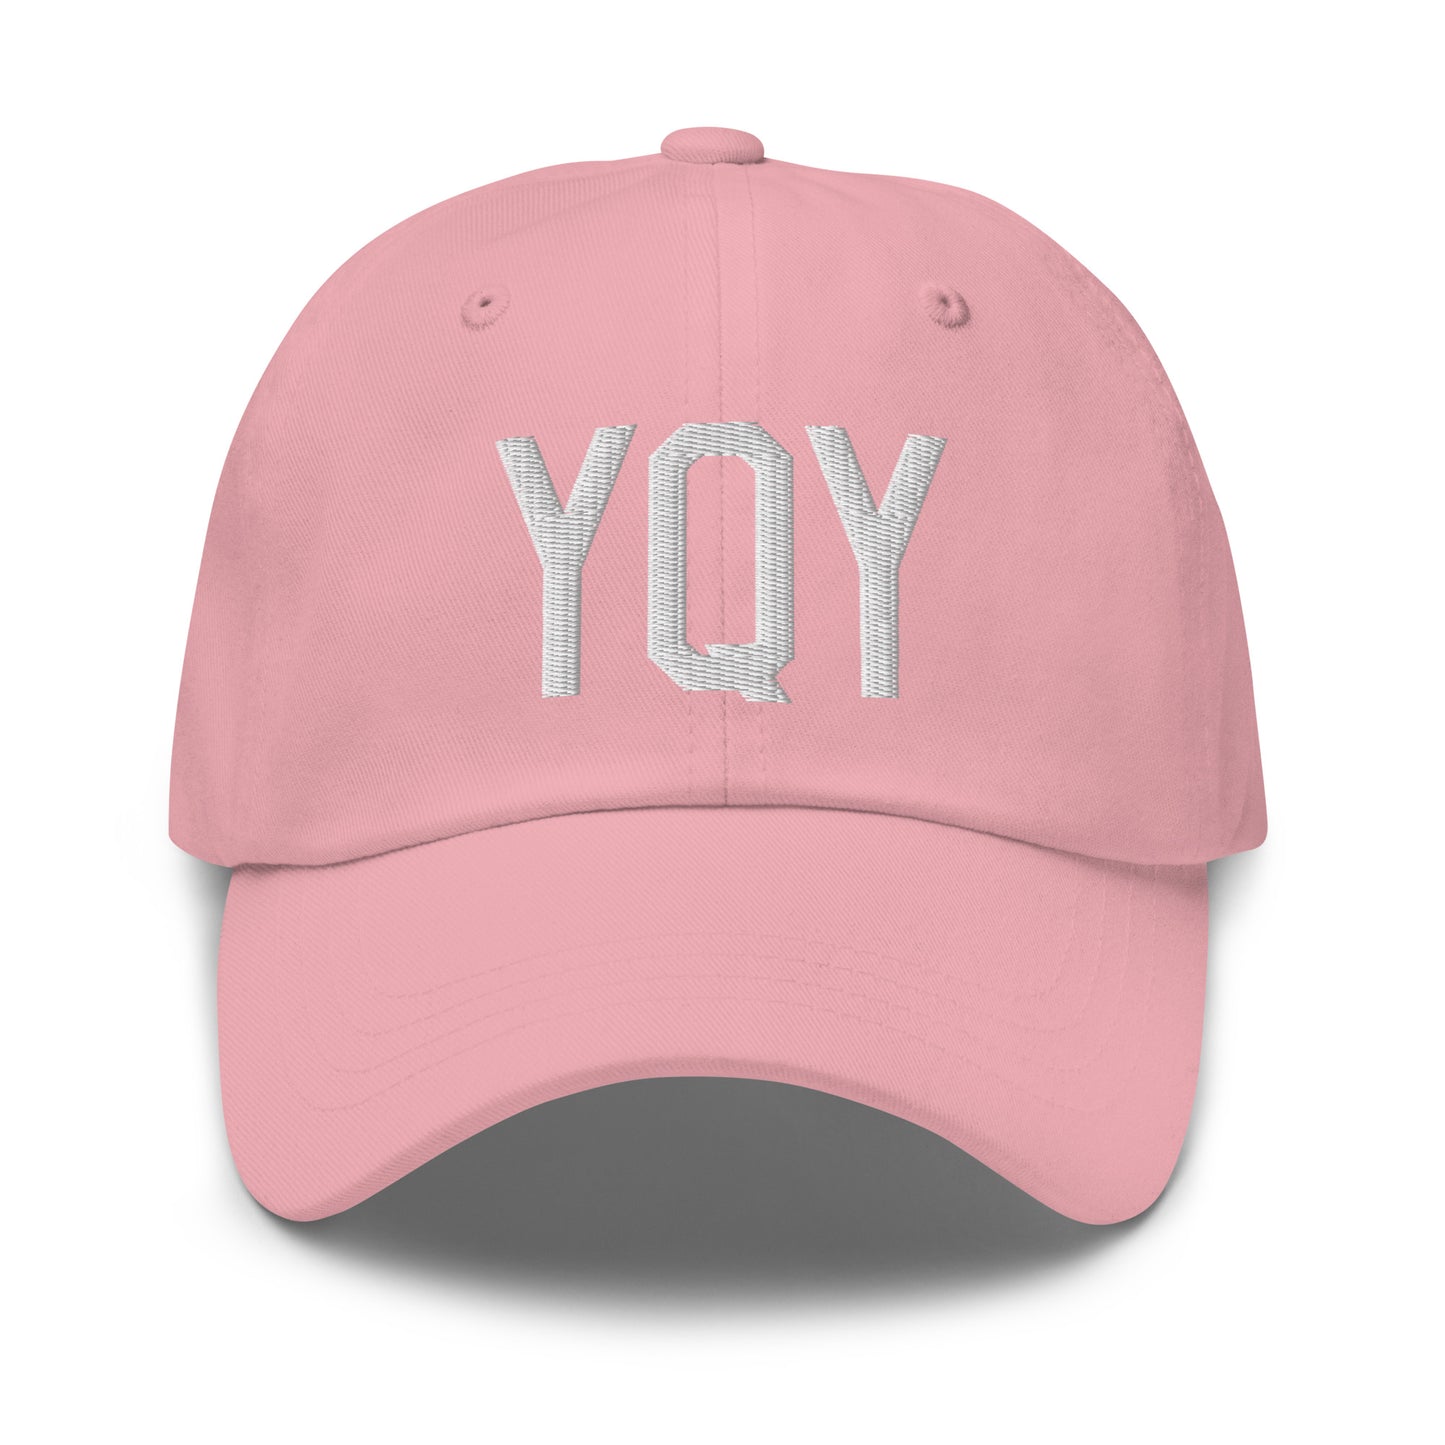 Airport Code Baseball Cap - White • YQY Sydney • YHM Designs - Image 25